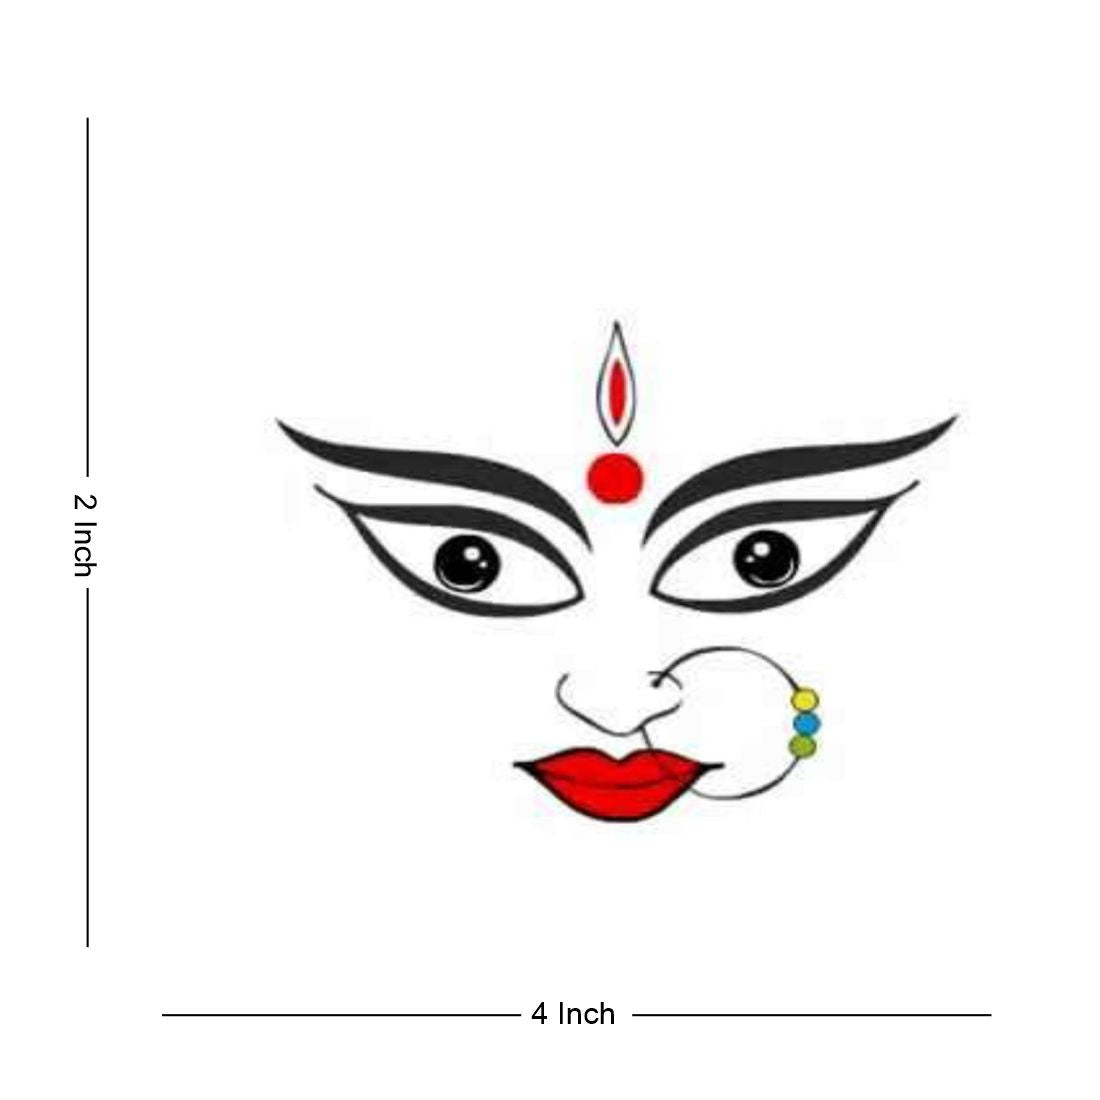 How to draw Maa Durga half face | Easy drawing for beginners | Lavi Arts |  Easy pencil drawing | Pencil drawings easy, Easy drawings, Drawing for  beginners